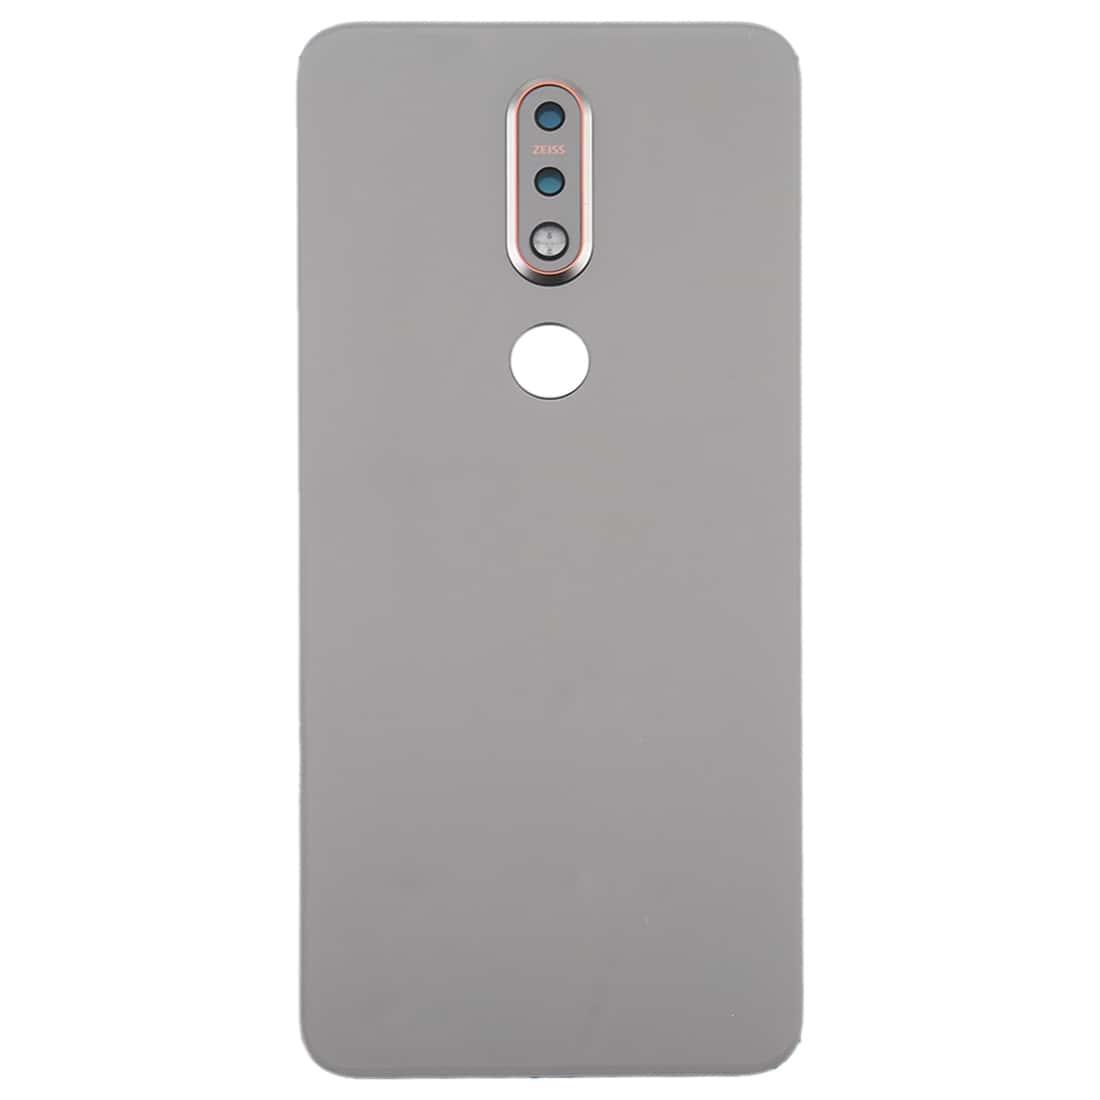 Back Glass Panel for  Nokia 7.1 Silver